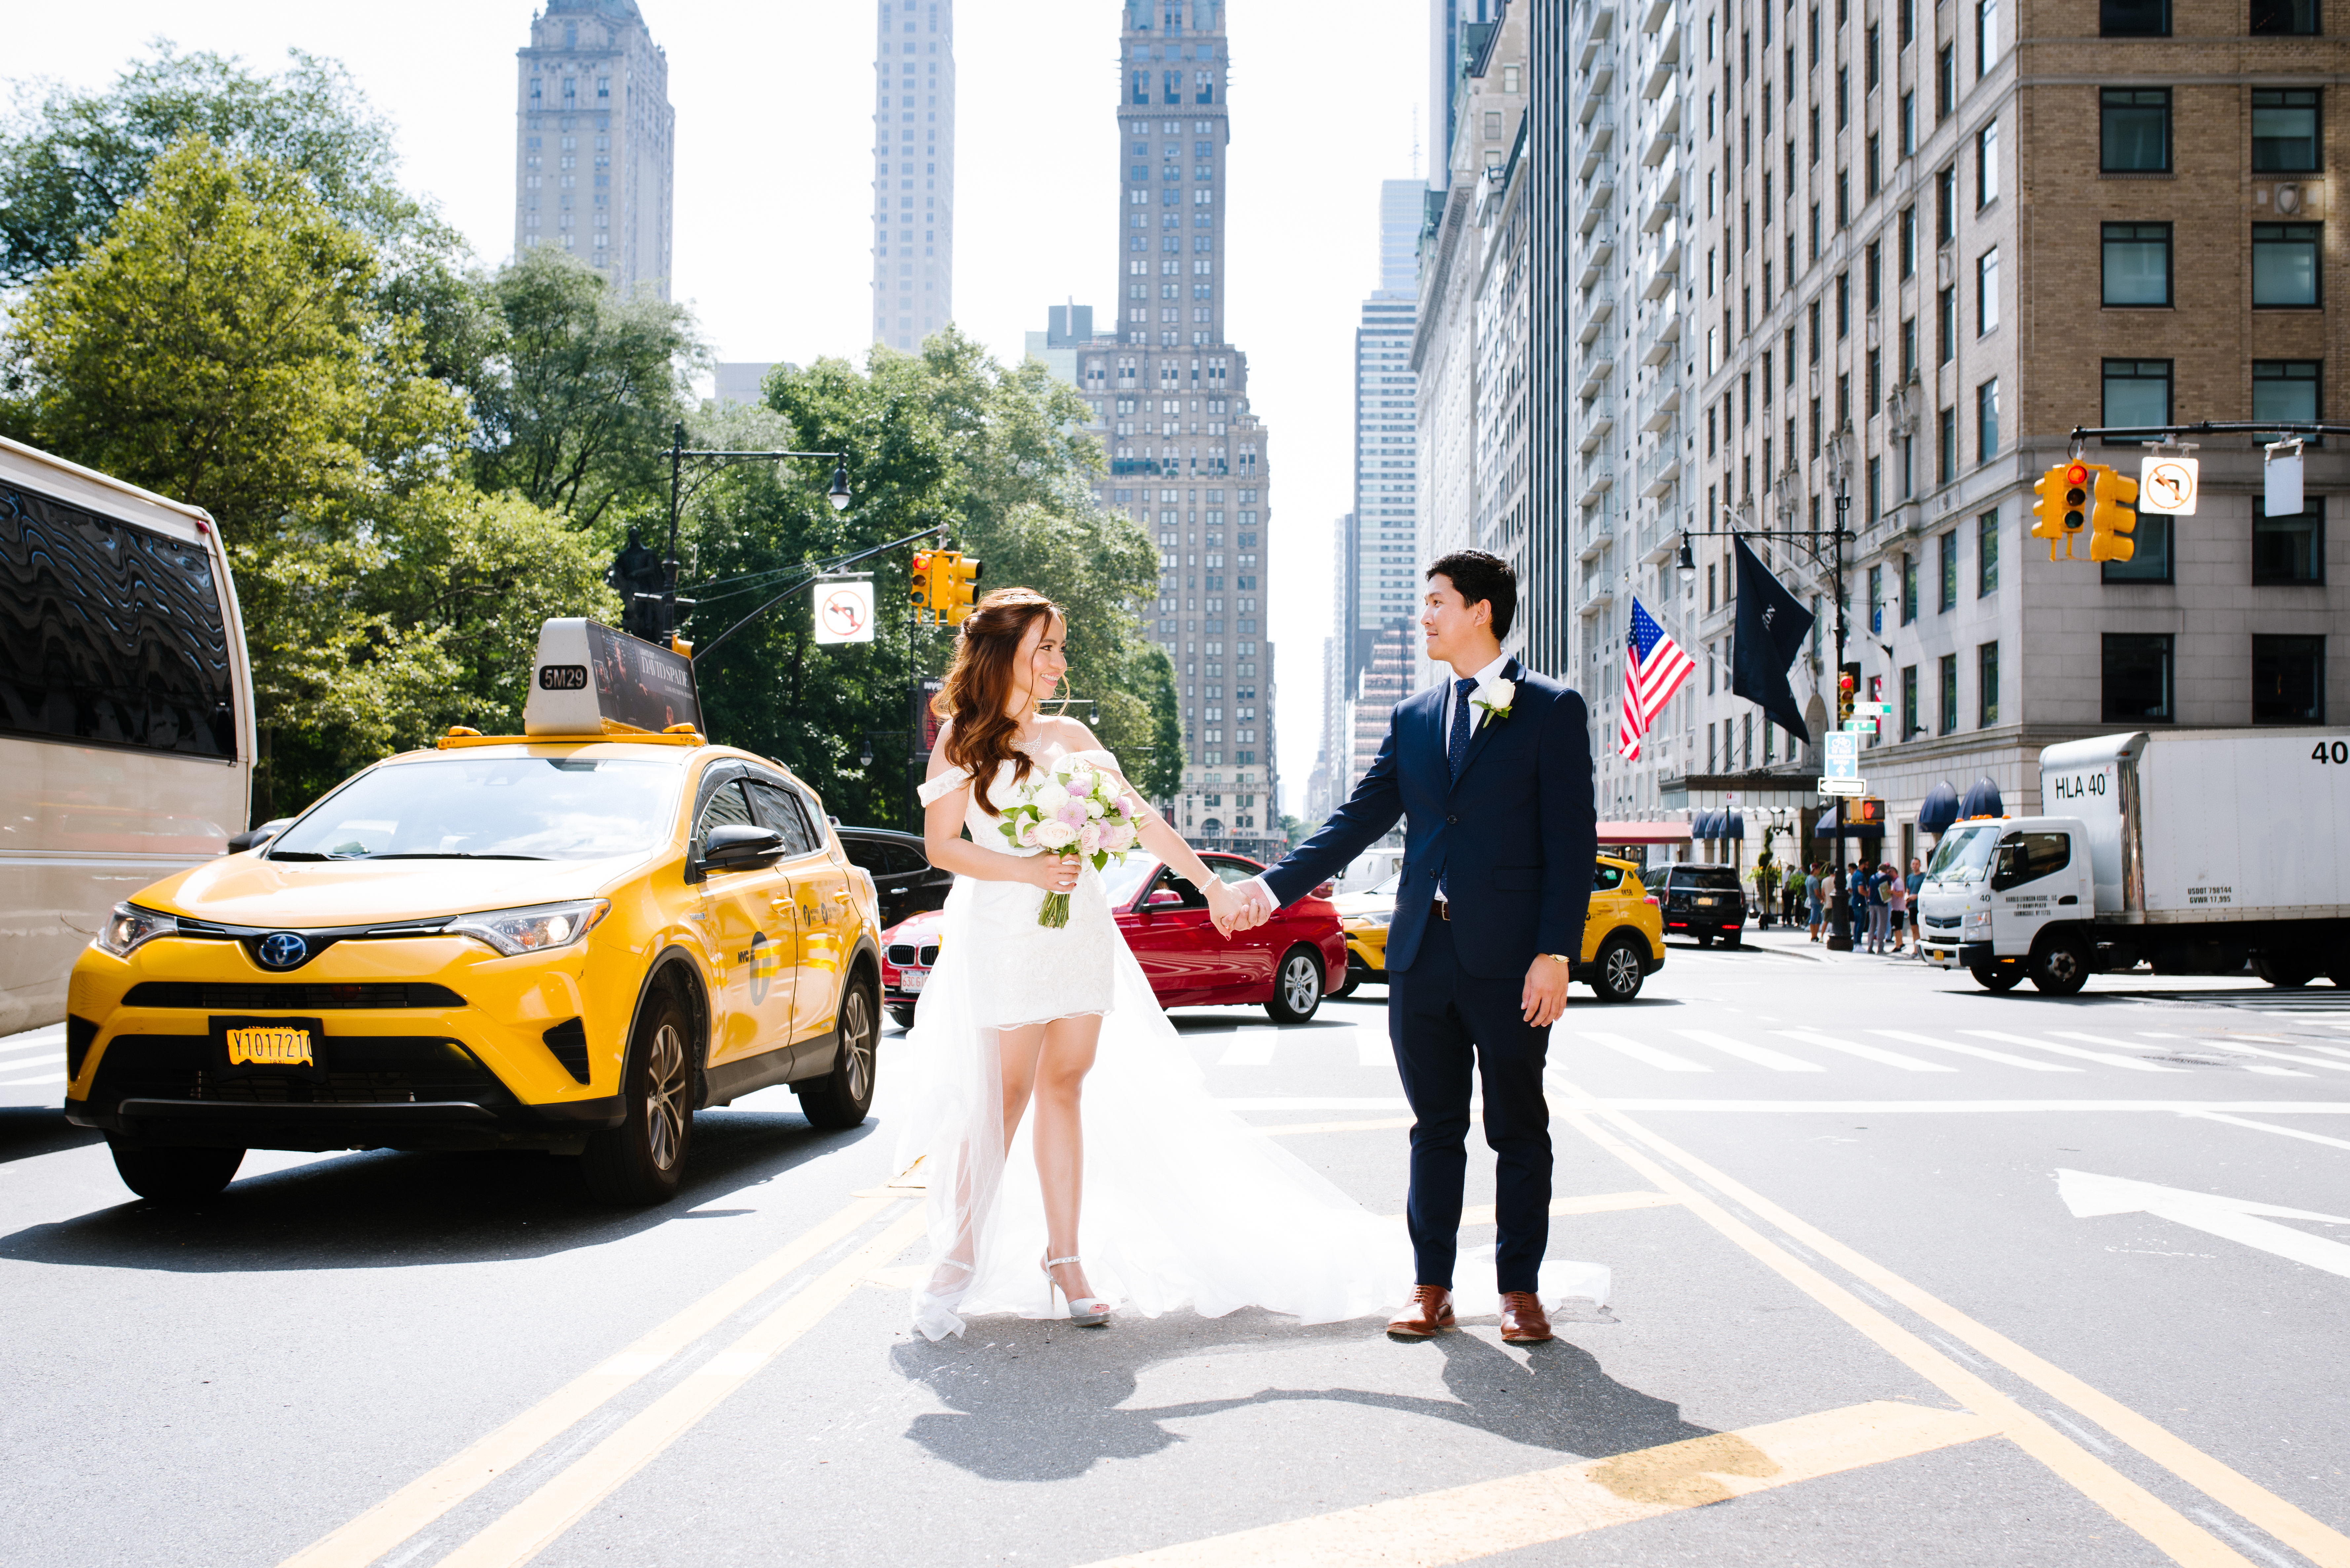 How to Get Married in NYC